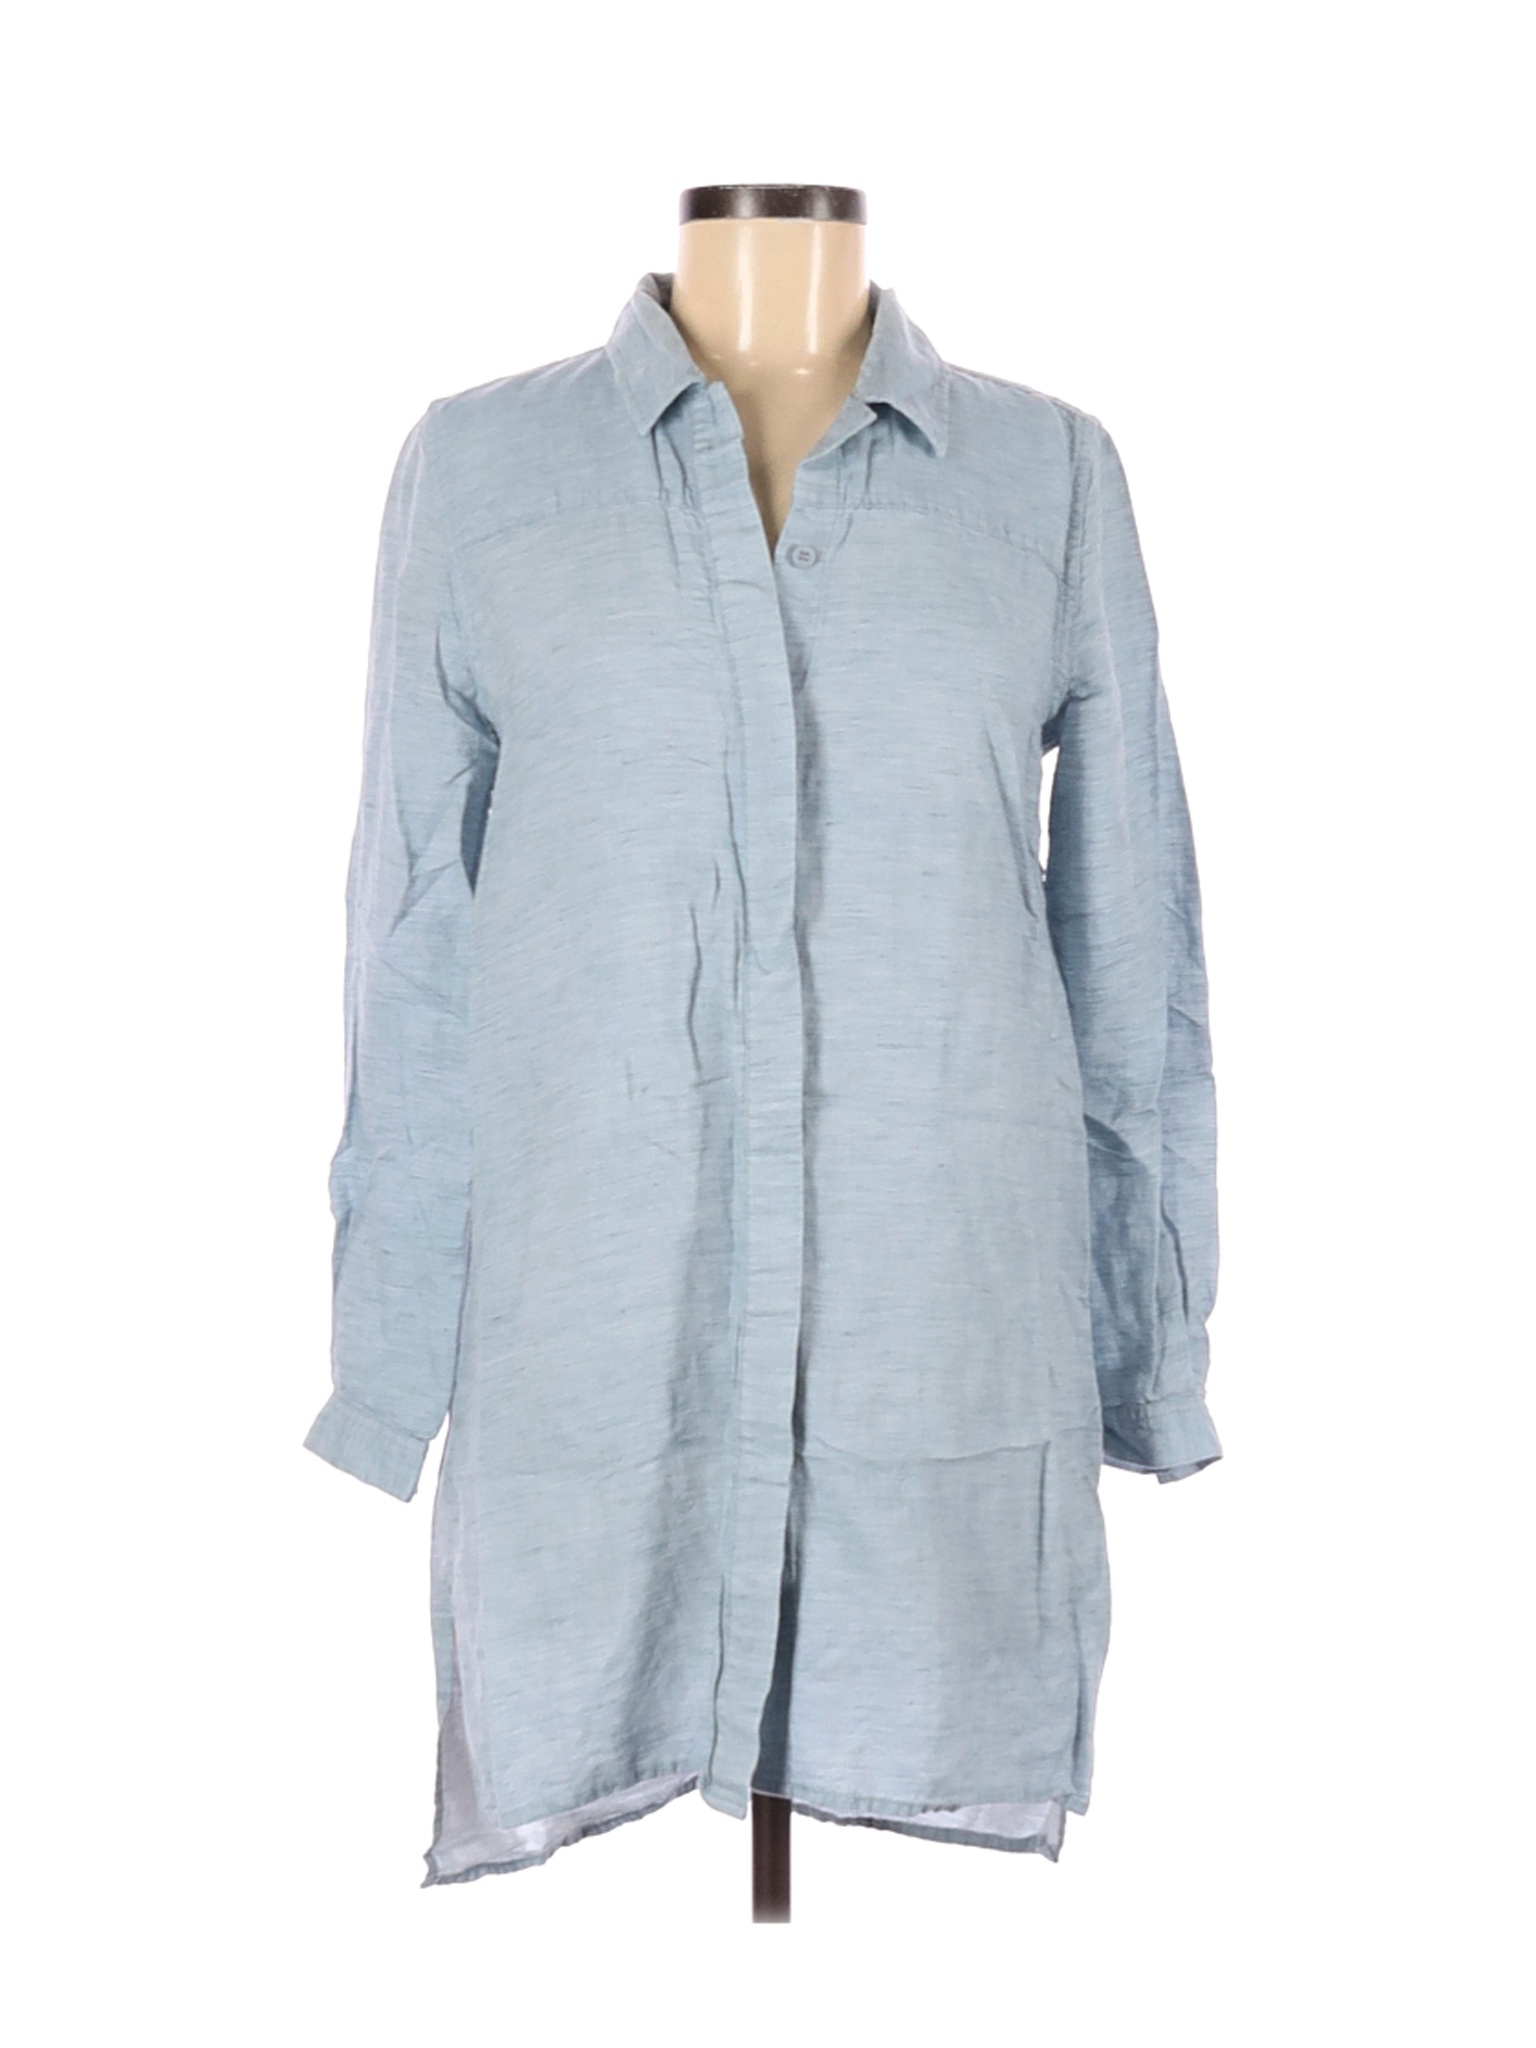 French Connection Women Blue Long Sleeve Button-Down Shirt 6 | eBay